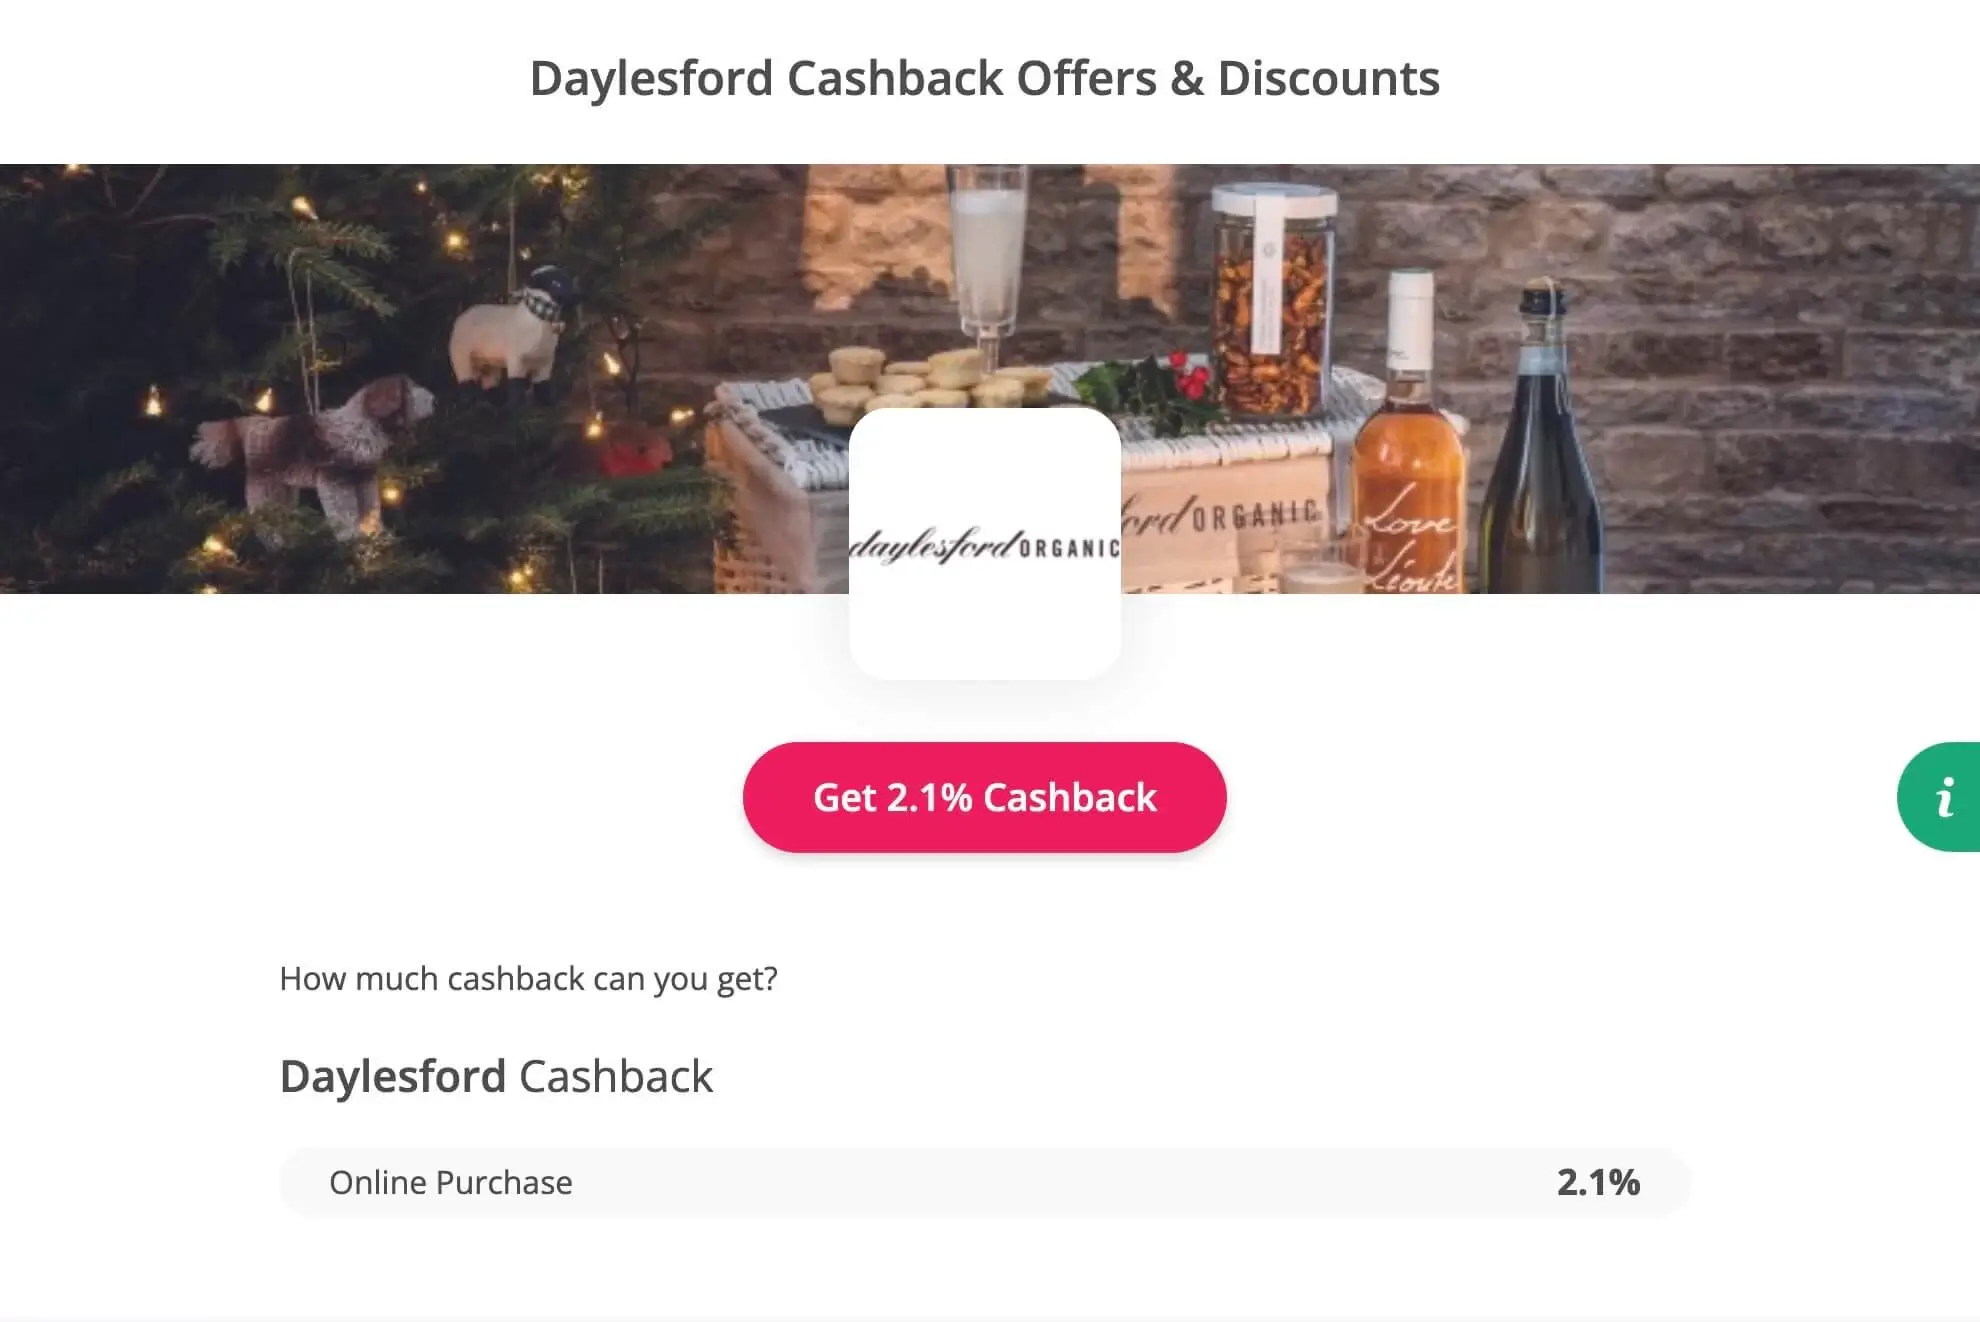 Daylesford cashback offers and discounts coupons